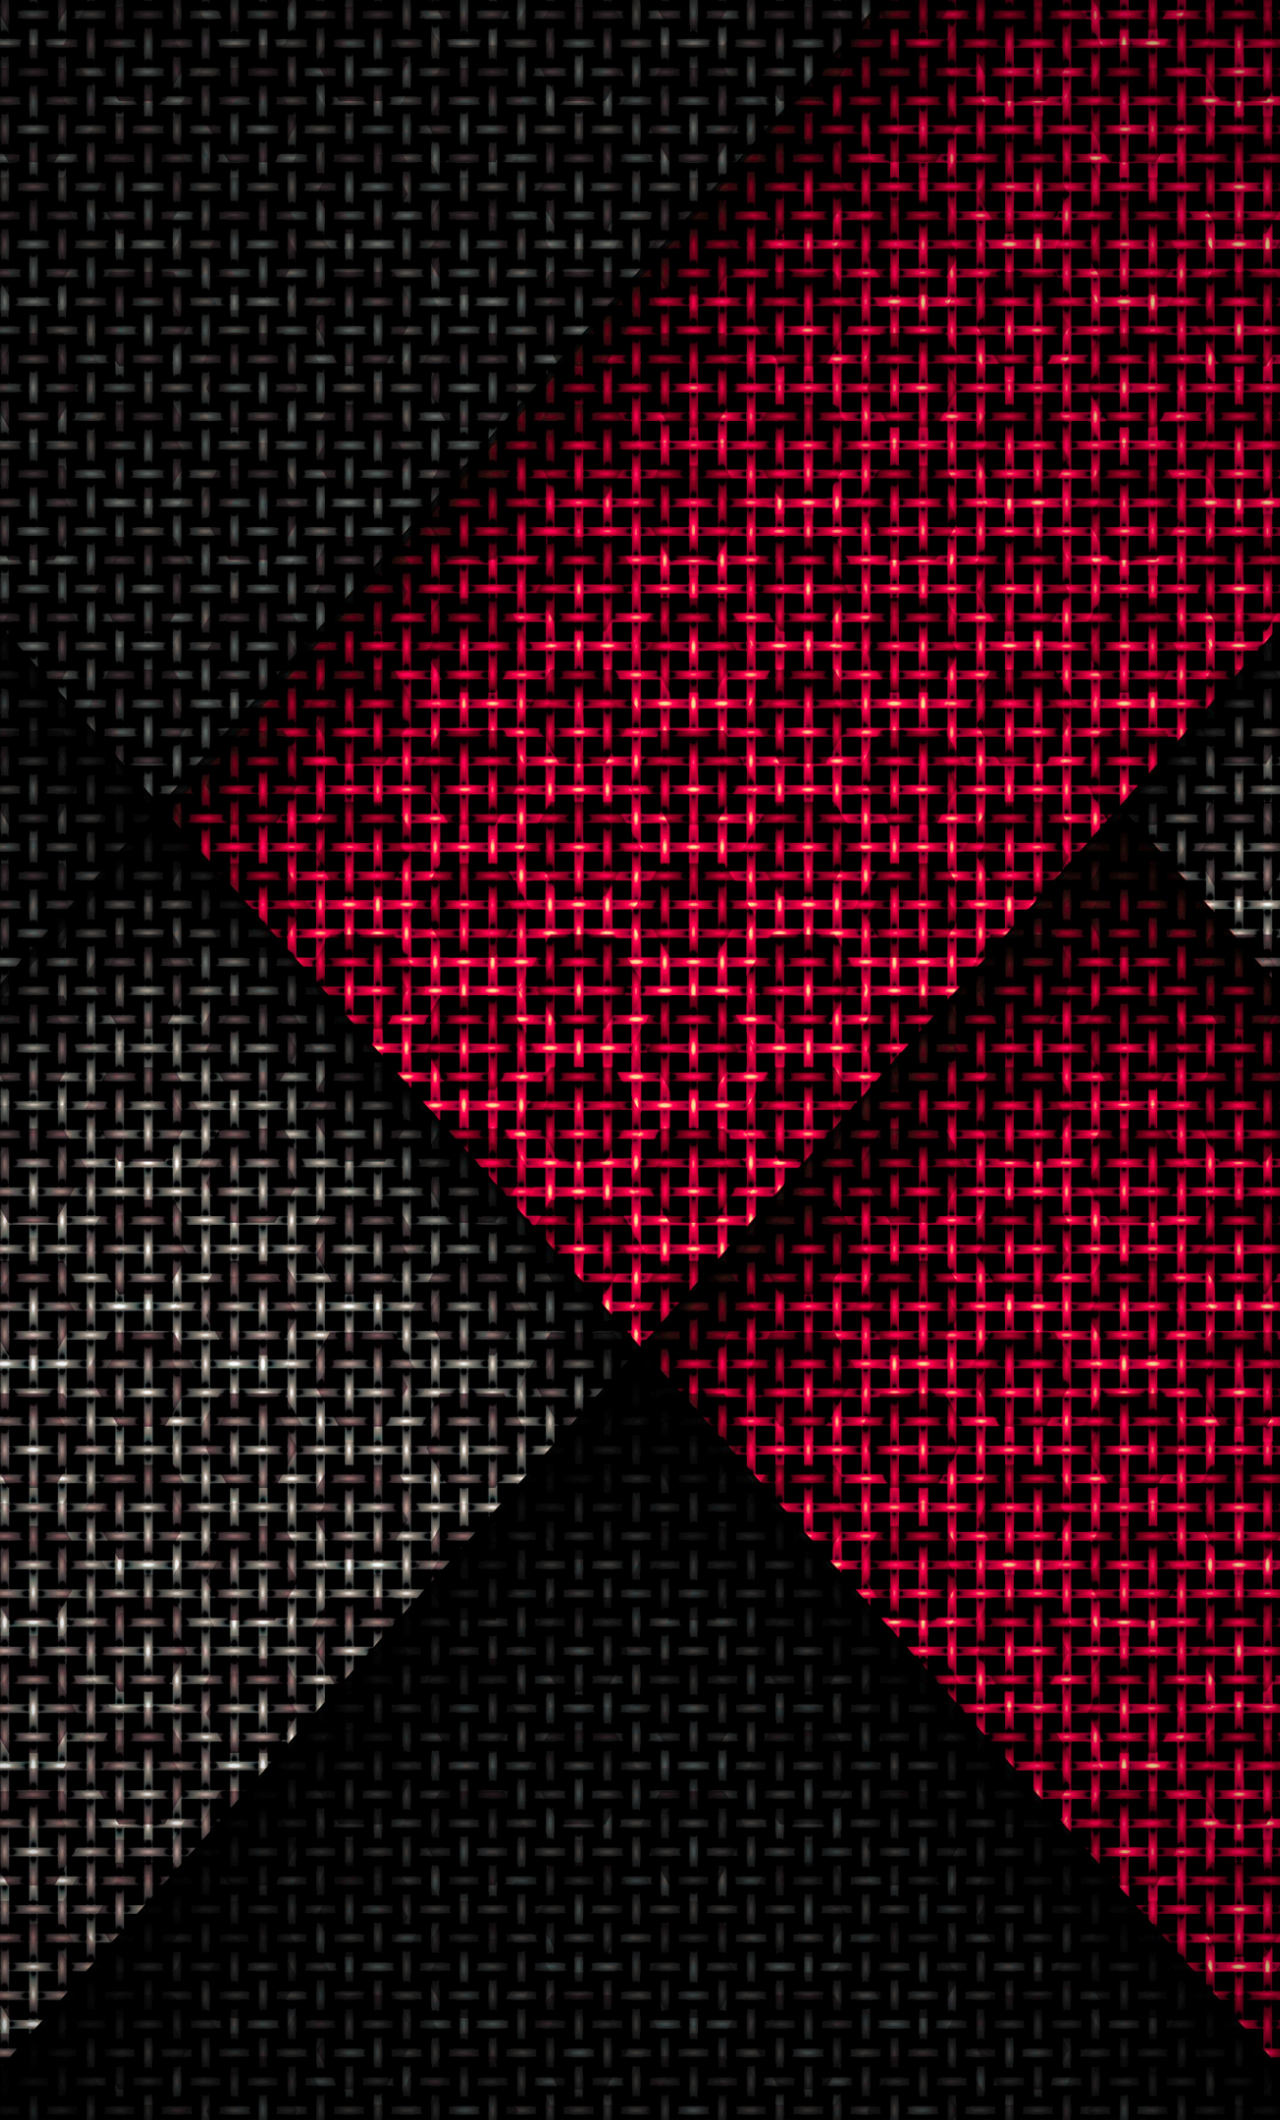 Download wallpaper 1280x2120 red-black texture, abstract, pride cross, art,  iphone 6 plus, 1280x2120 hd background, 23271